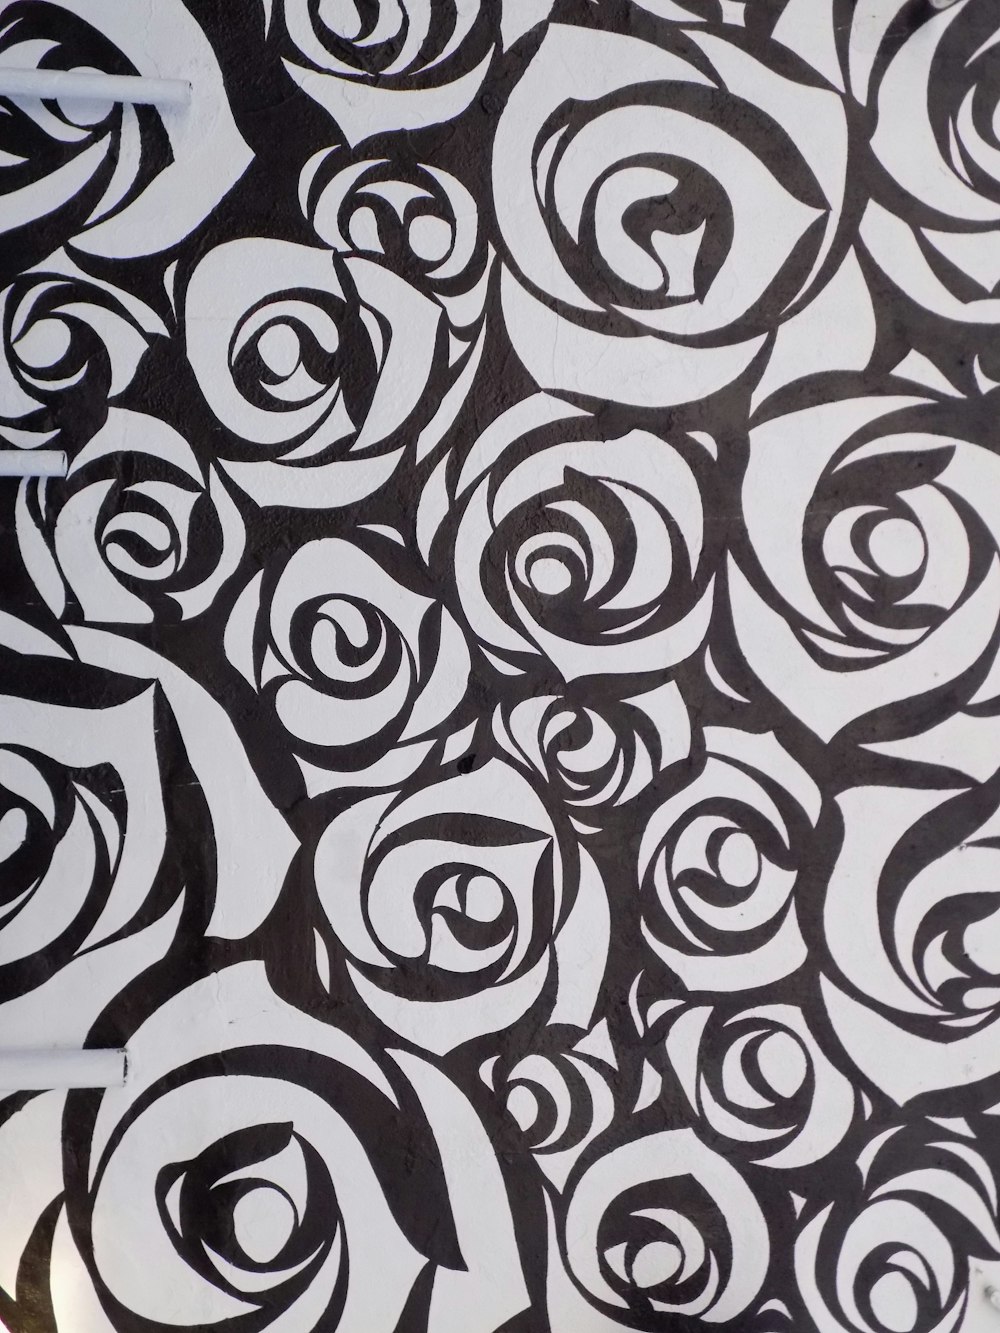 cool patterns and designs in black and white